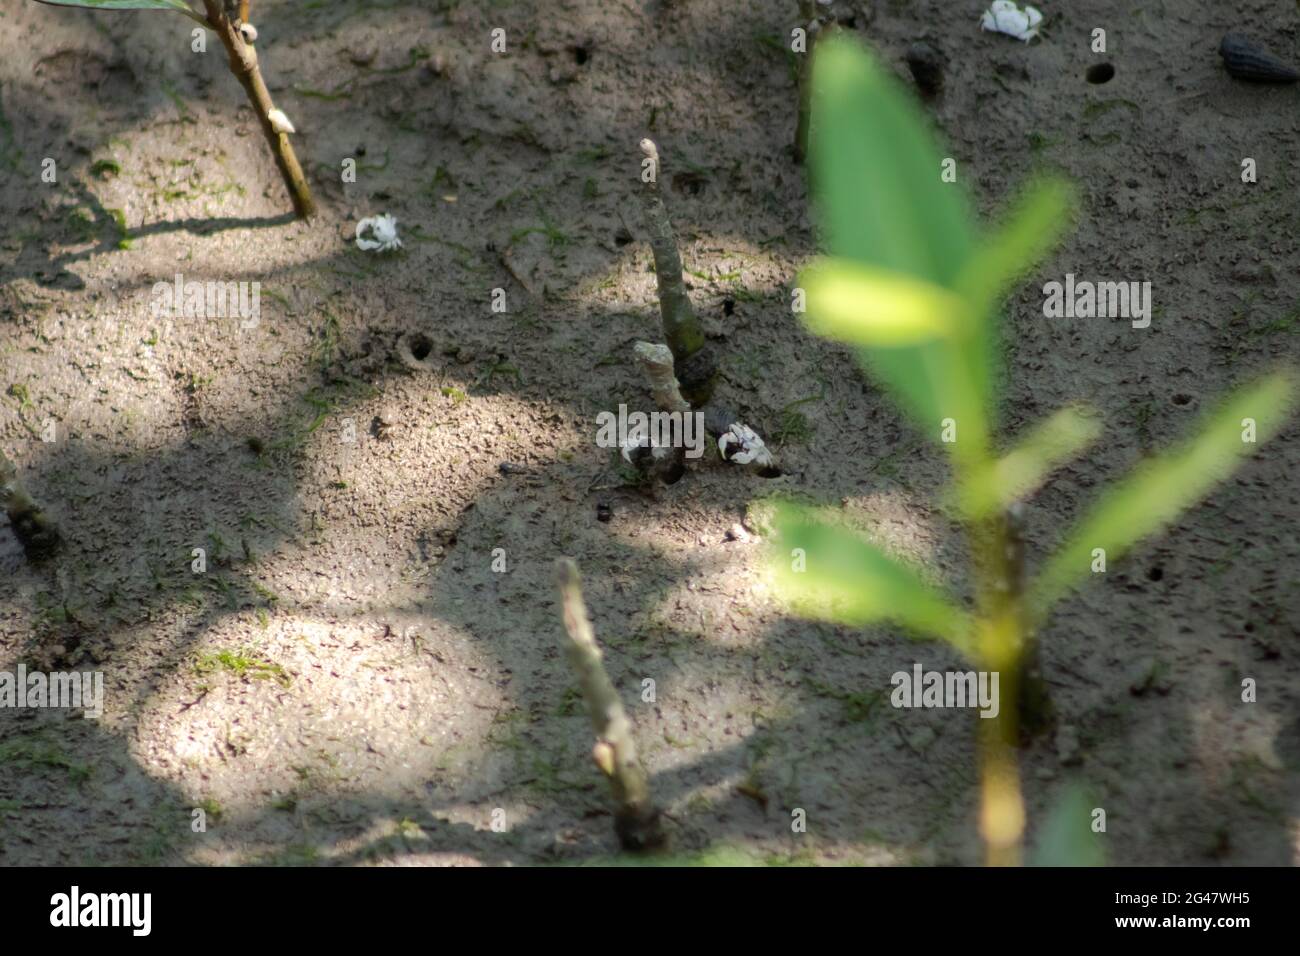 A small white crab called White Semaphore Crab(Ilyoplax delsmani) on the mudflats in mangrove forest, Tanjung Piai Rainforest, Malaysia Stock Photo